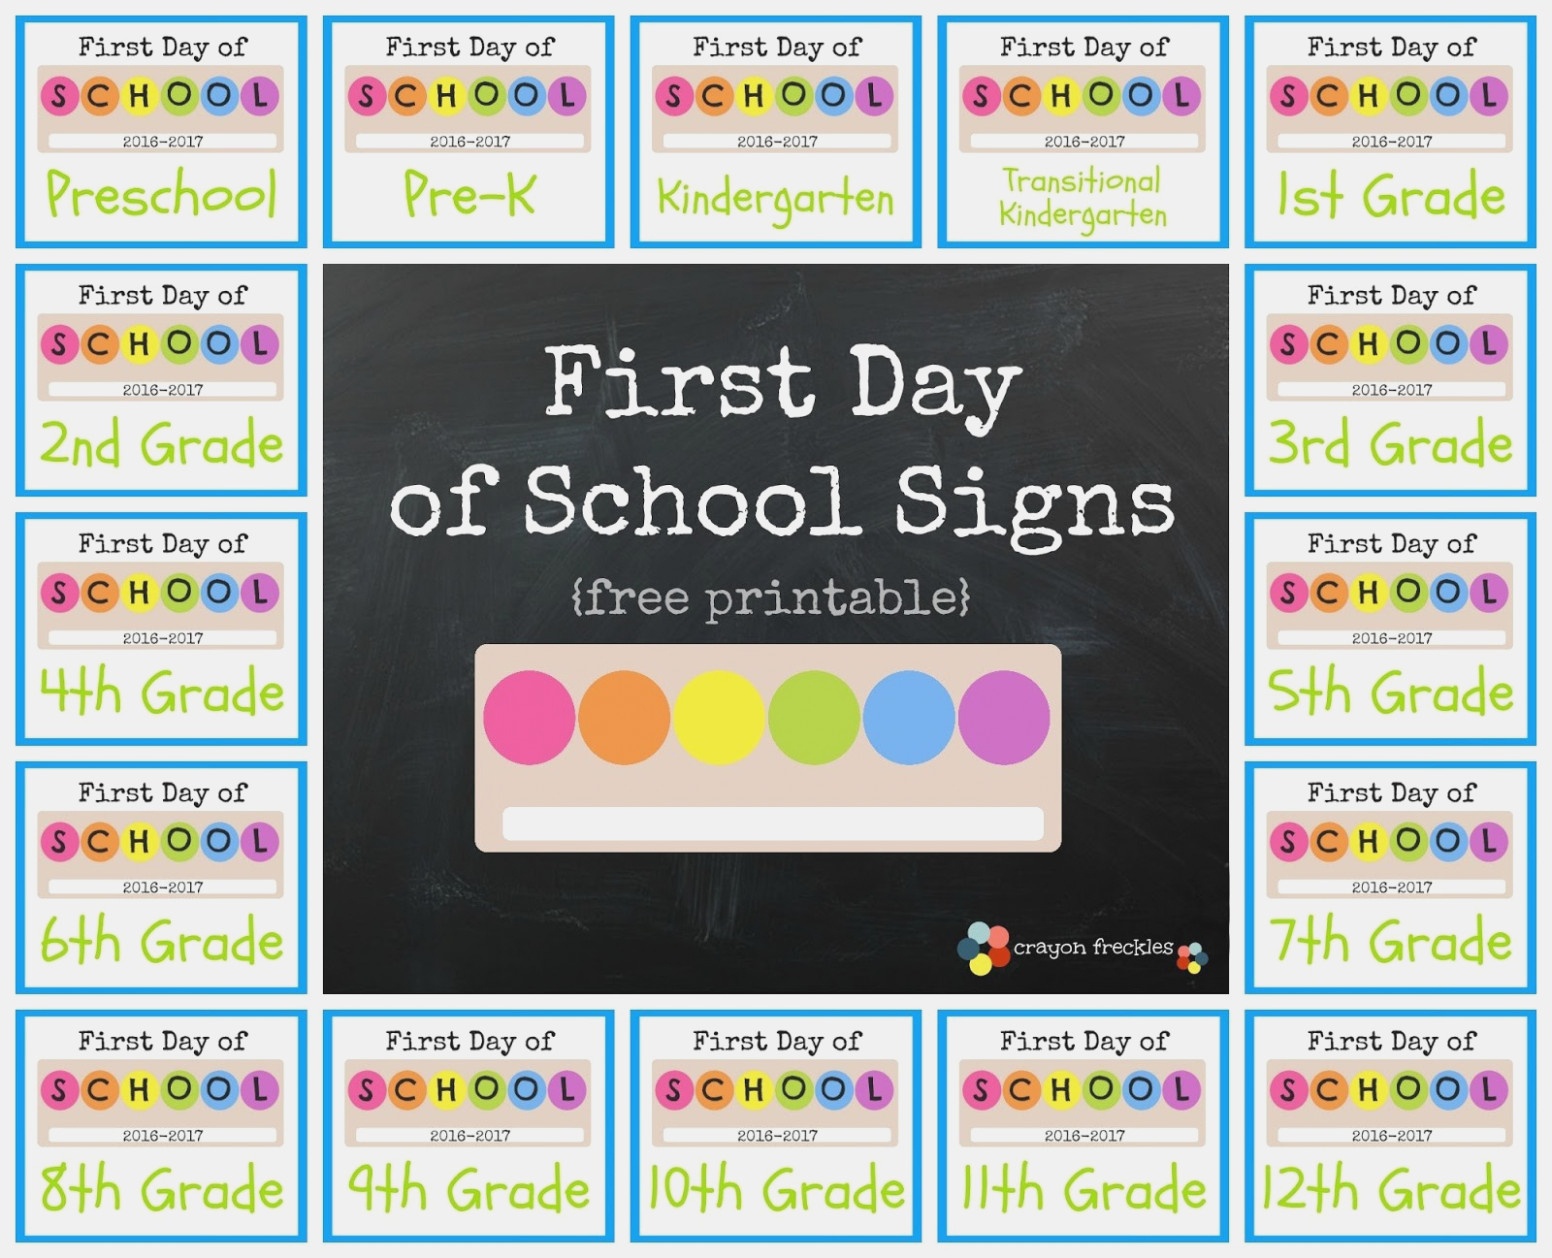 Free Printable Classroom Signs And Labels | Popisgrzegorz – Label - Free Printable Classroom Signs And Labels